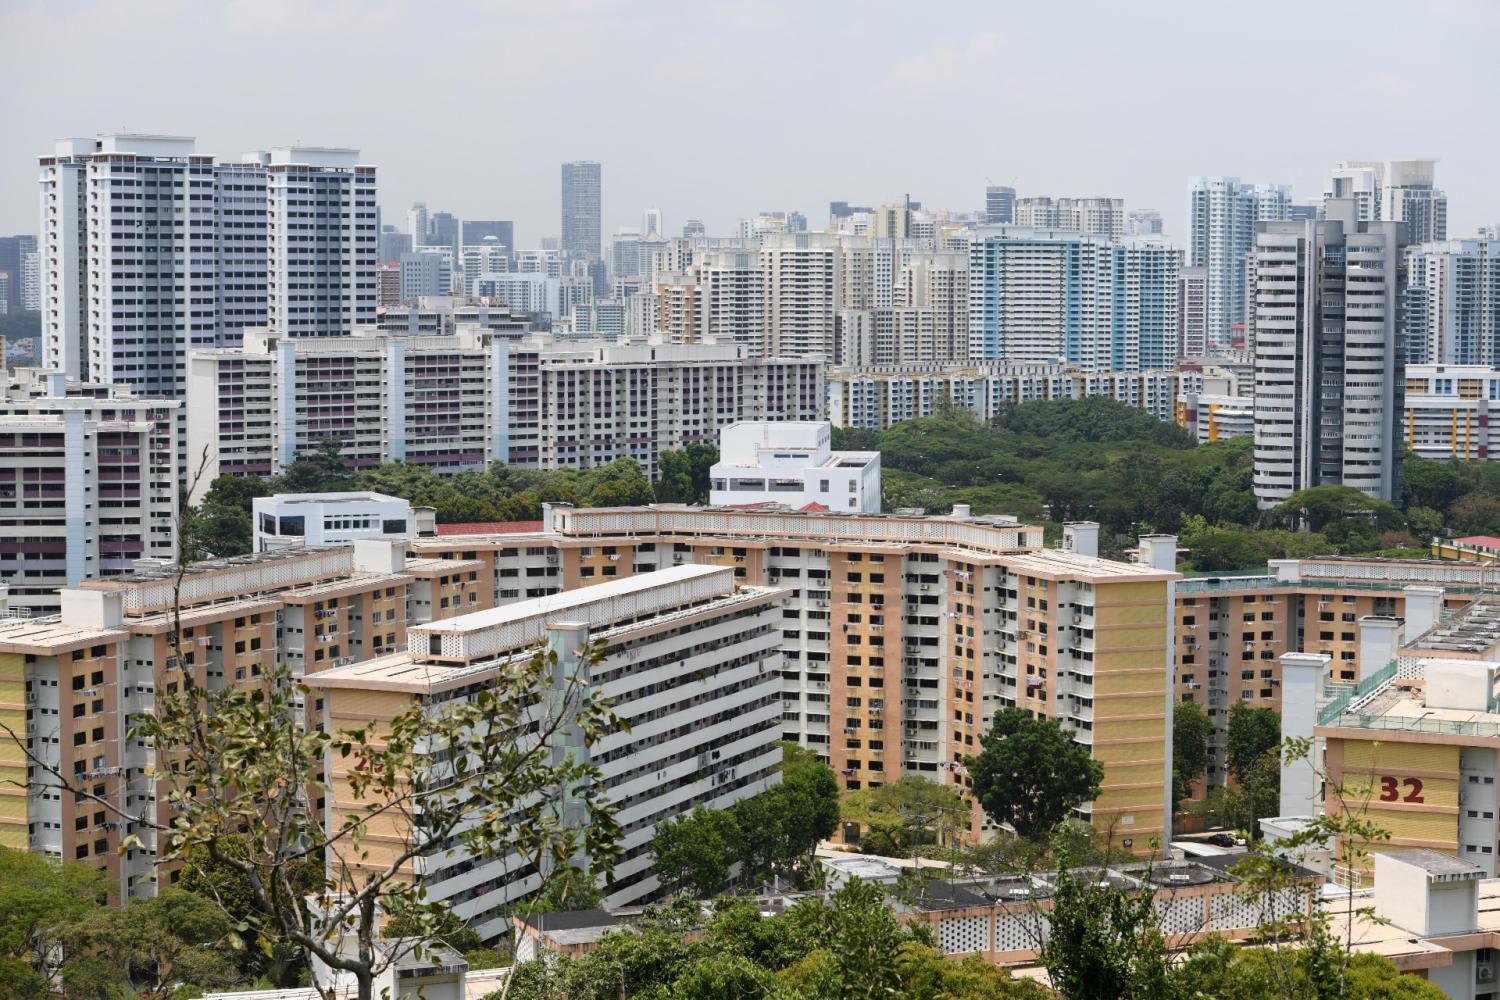 A general view of some public housing blocks in Singapore.